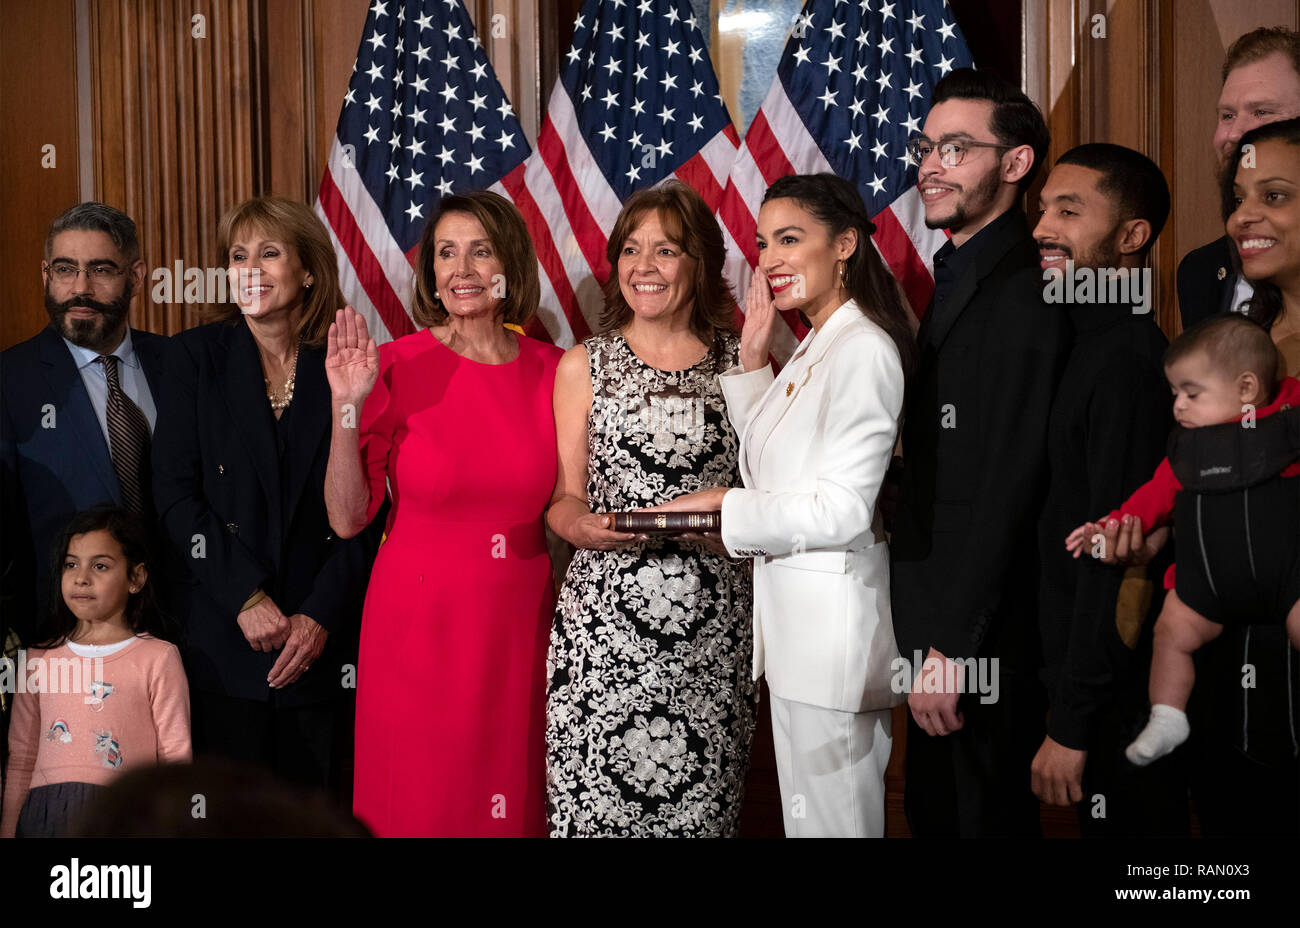 Washington, United States Of America. 03rd Jan, 2019. United States Representative Alexandria Ocasio-Cortez (Democrat of New York) poses for a mock swearing-in photo with Speaker of the US House of Representatives Nancy Pelosi (Democrat of California) and members of her family as the 116th Congress convenes for its opening session in the US Capitol in Washington, DC on Thursday, January 3, 2019. Credit: Ron Sachs/CNP (RESTRICTION: NO New York or New Jersey Newspapers or newspapers within a 75 mile radius of New York City) | usage worldwide Credit: dpa/Alamy Live News Stock Photo